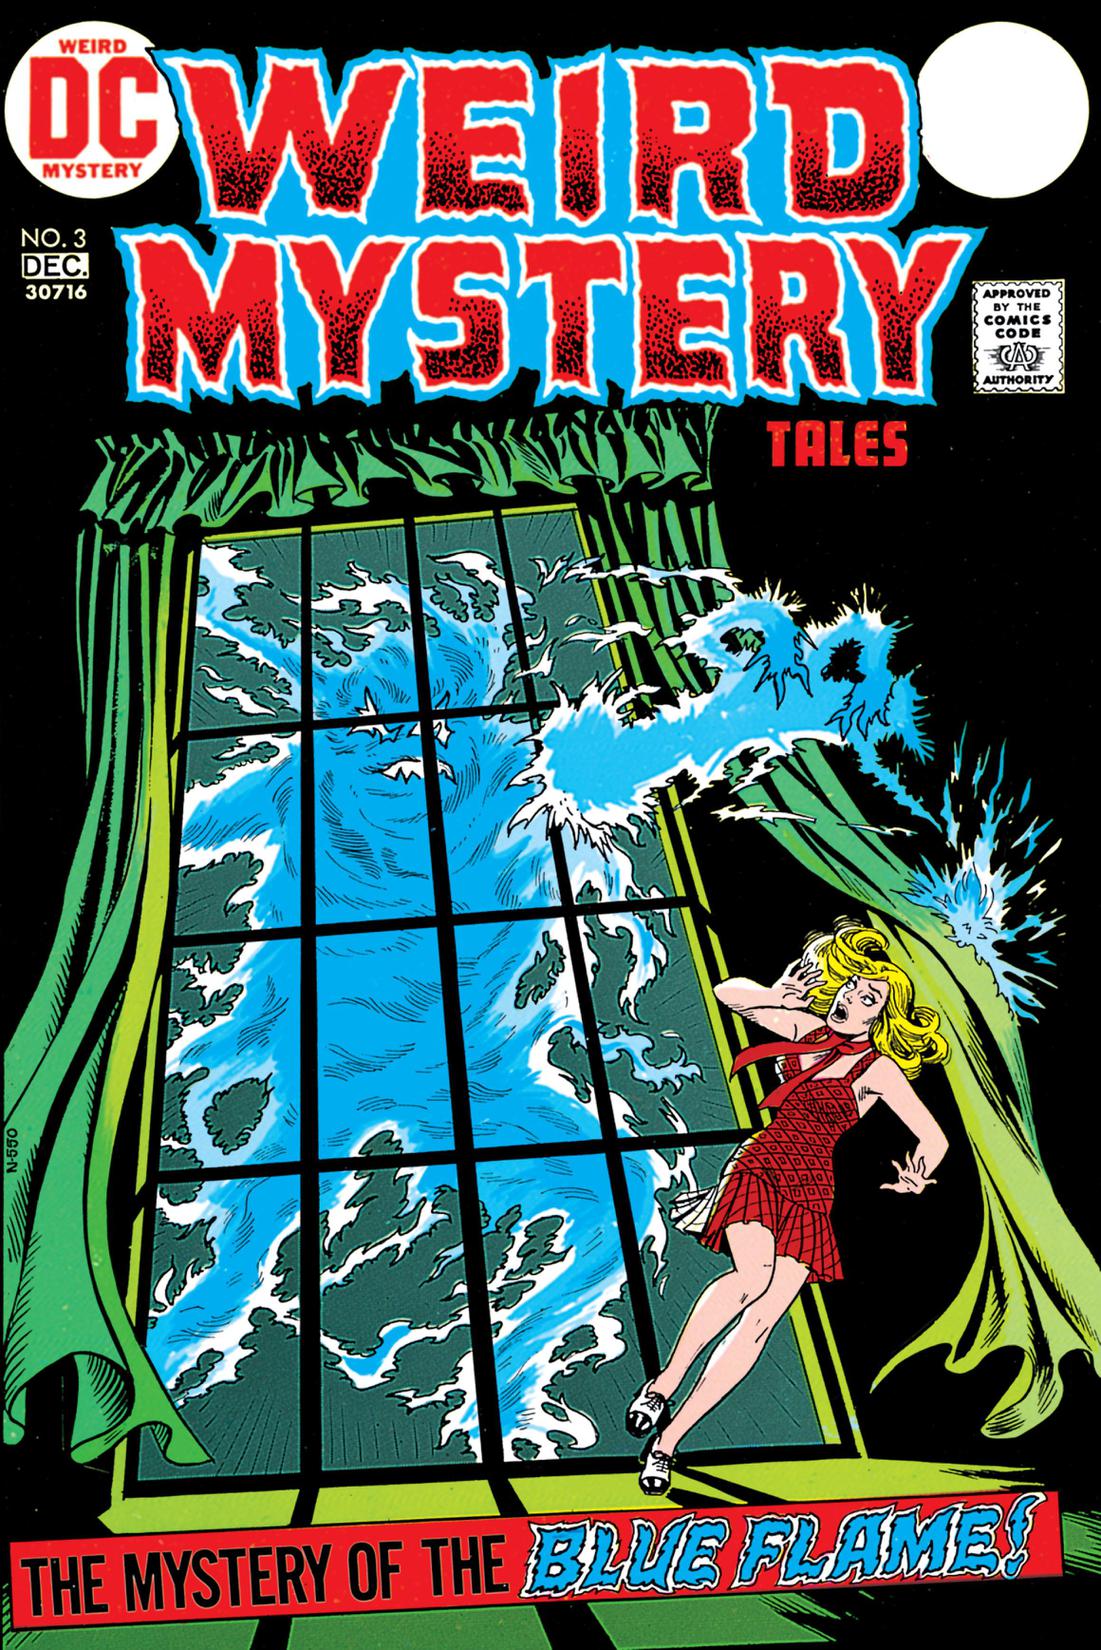 Weird Mystery Tales #3 preview images